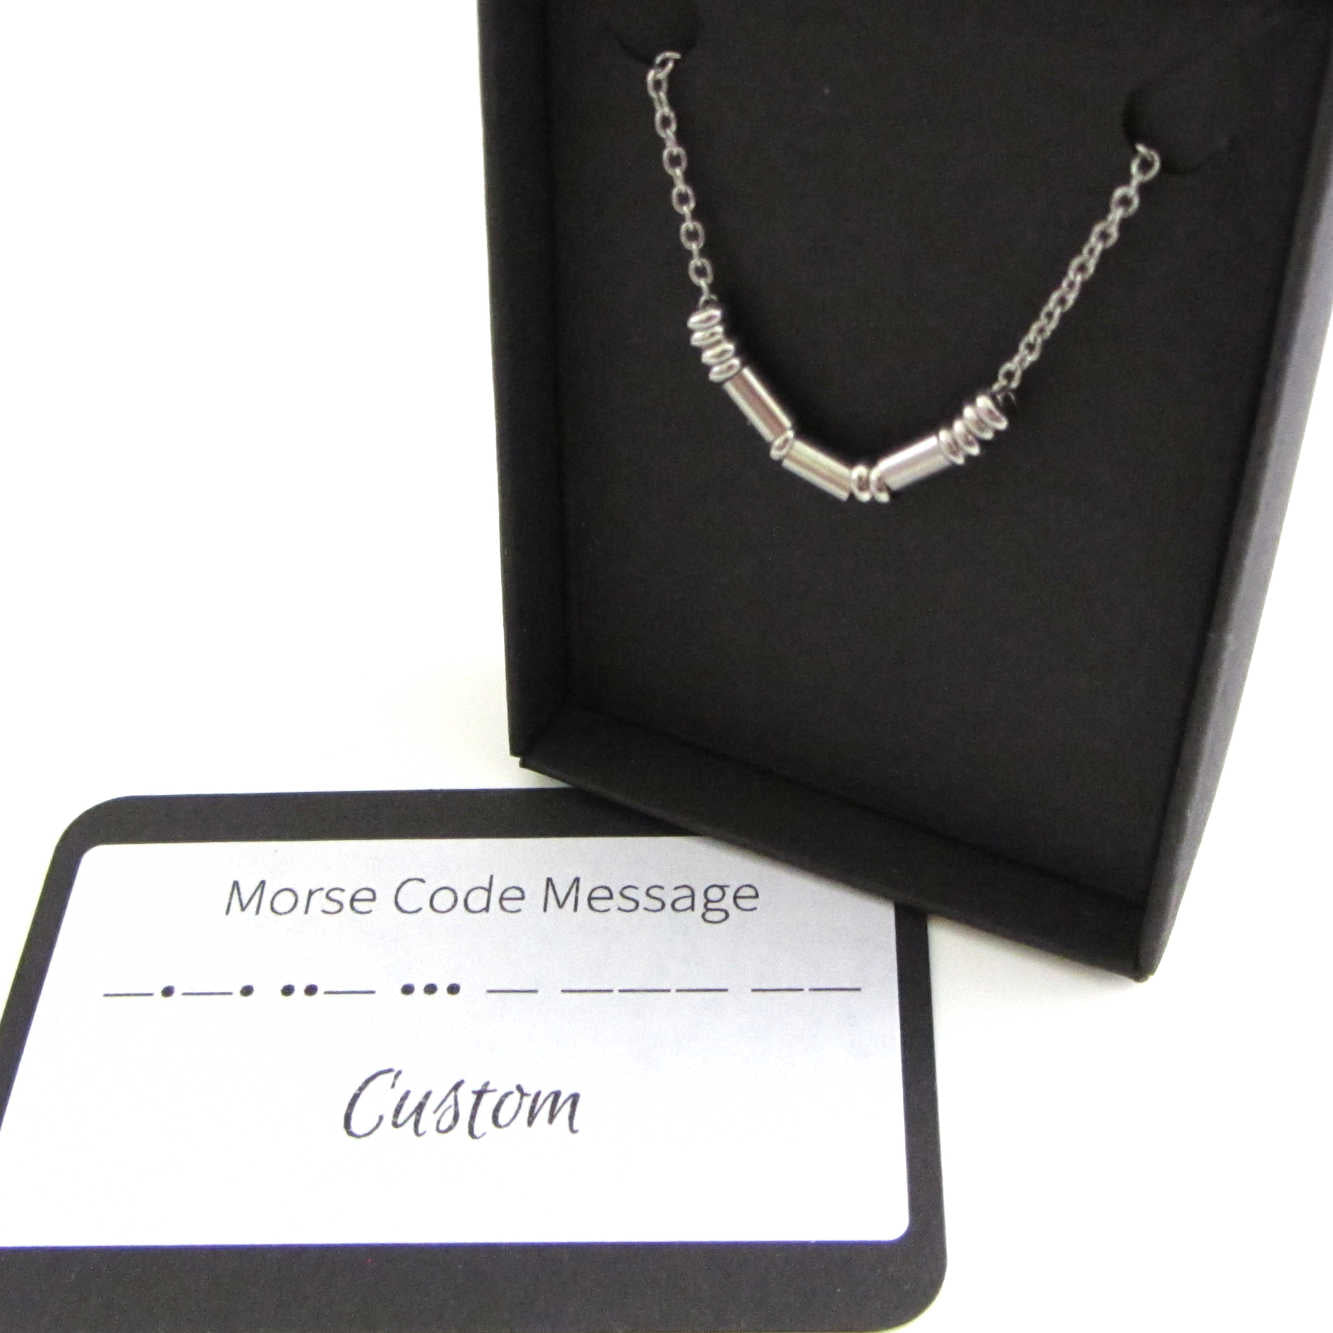 close up of 'sarah' name necklace written in morse code stainless steel beads on a stainless steel chain shown in box with custom morse code message card